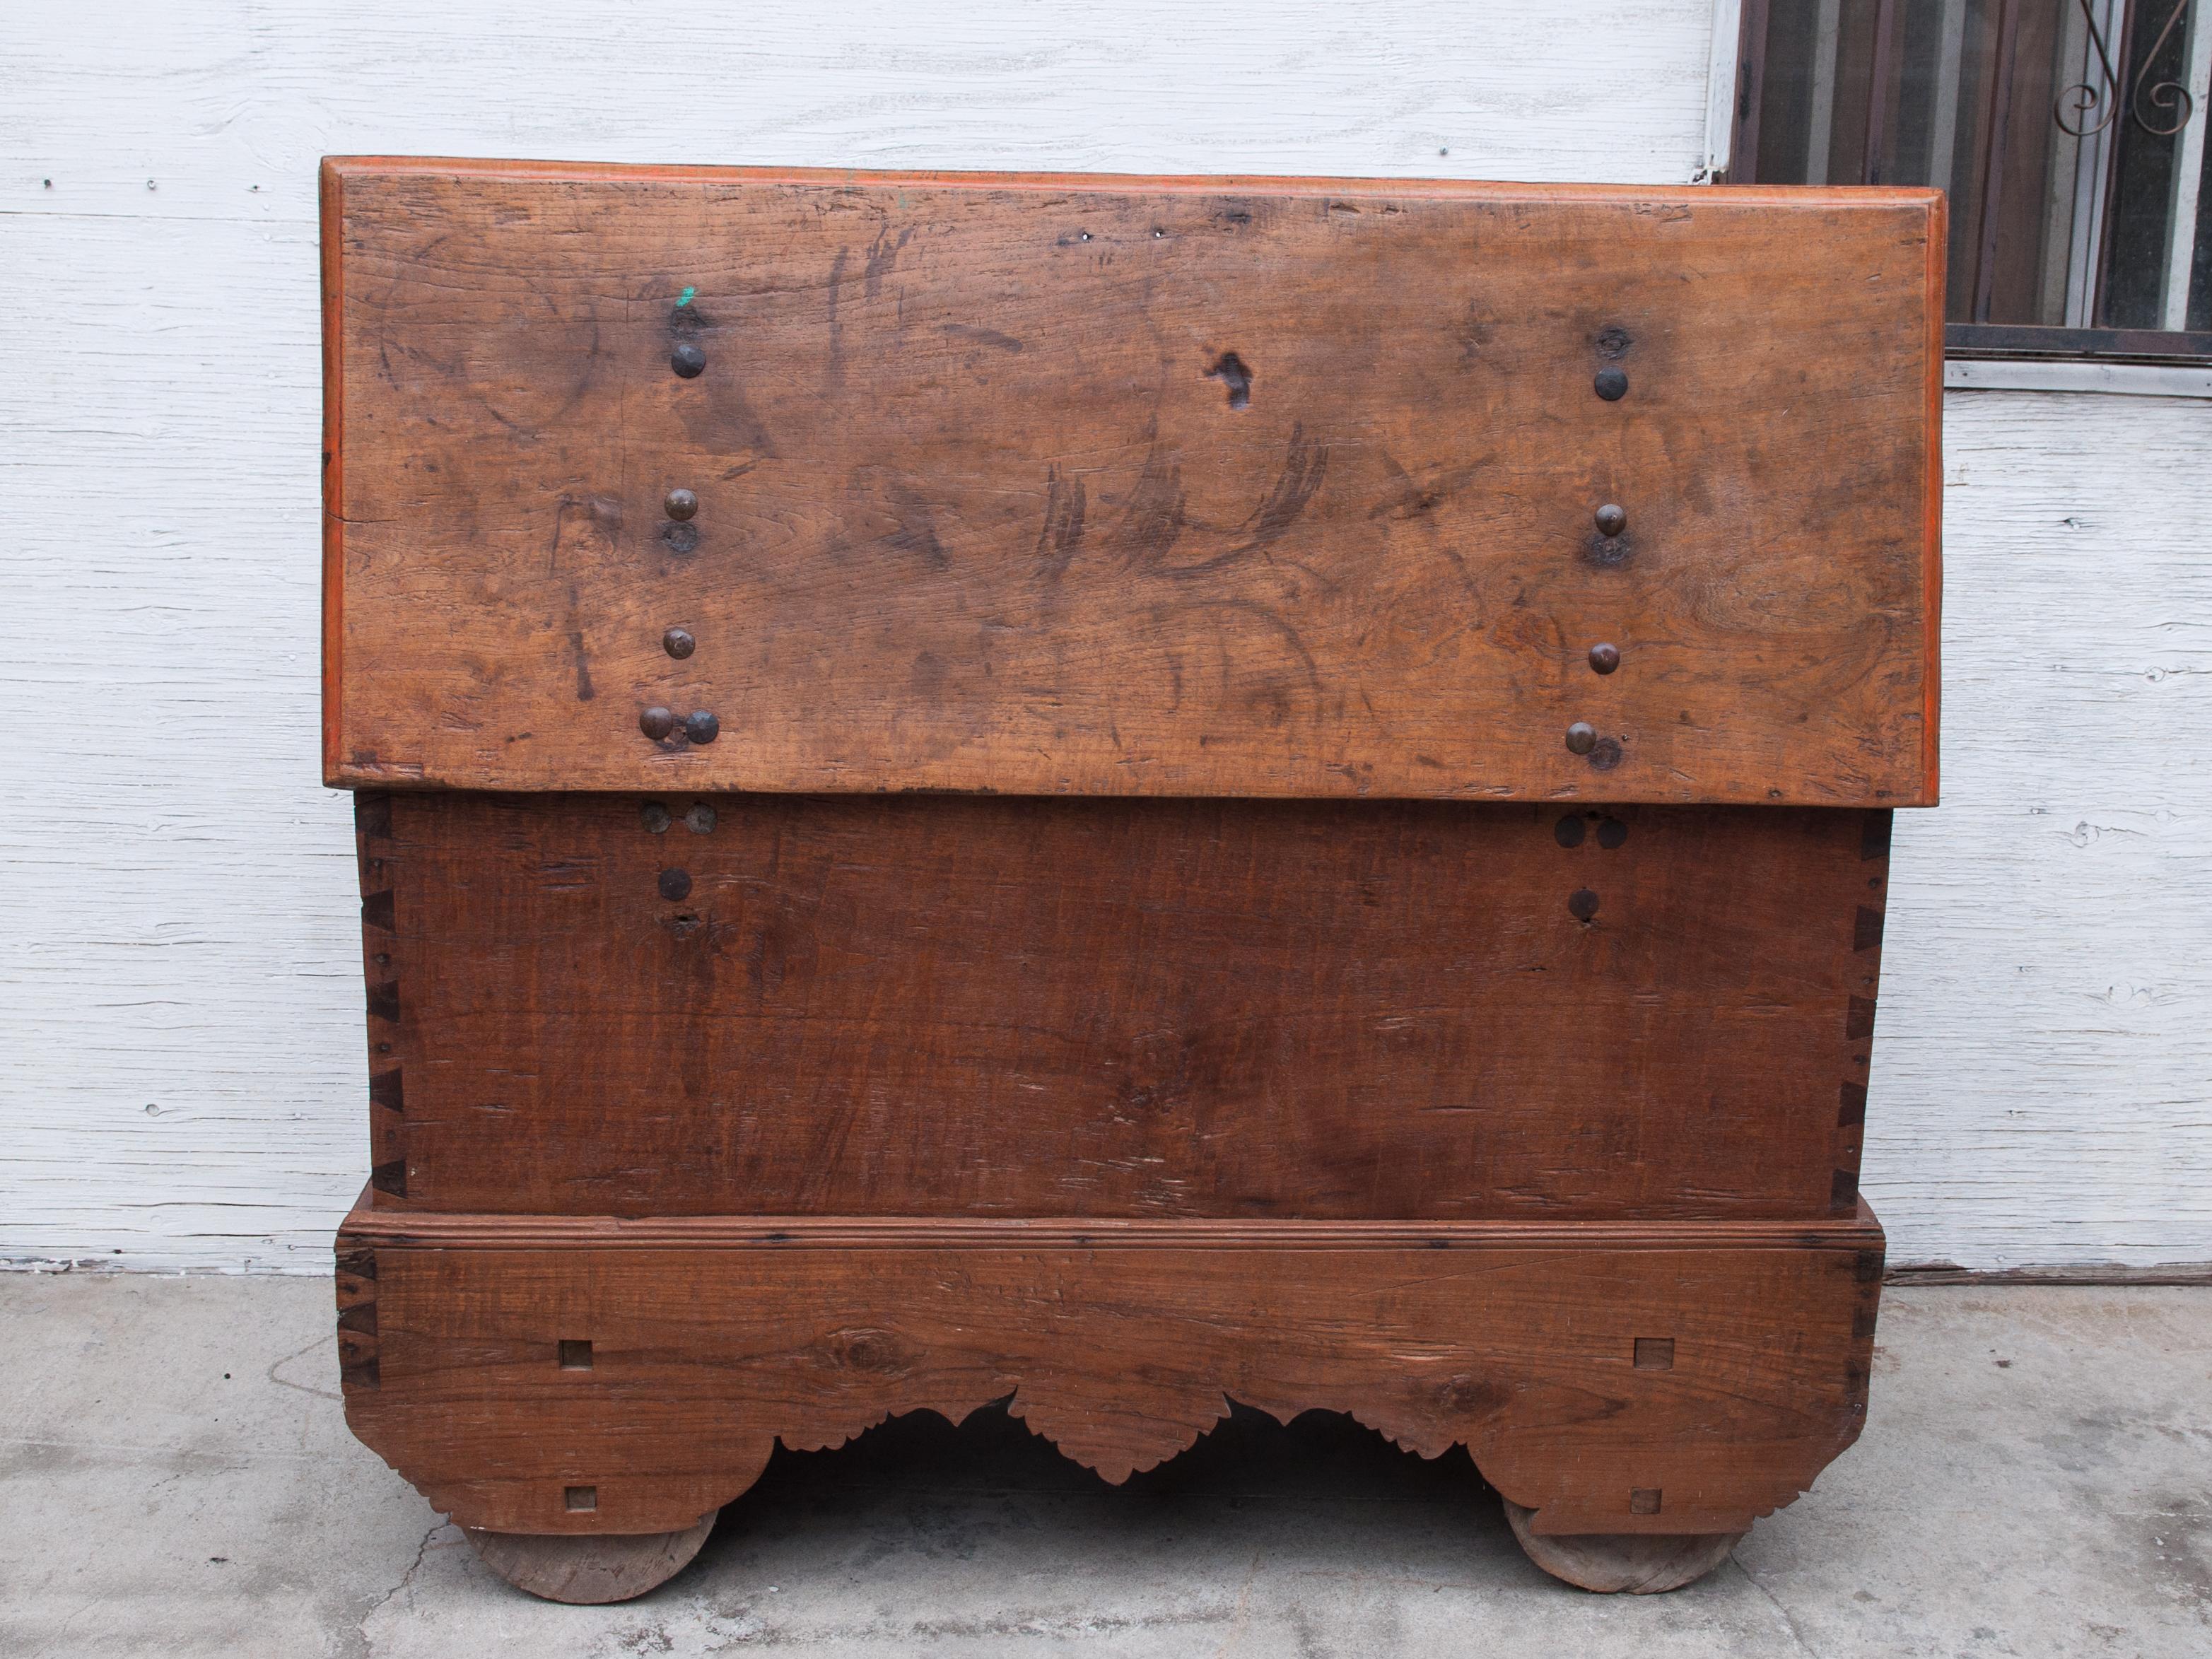 Mid-20th Century Teak Chest on Wheels from Java. Original Color and Hardware. 13